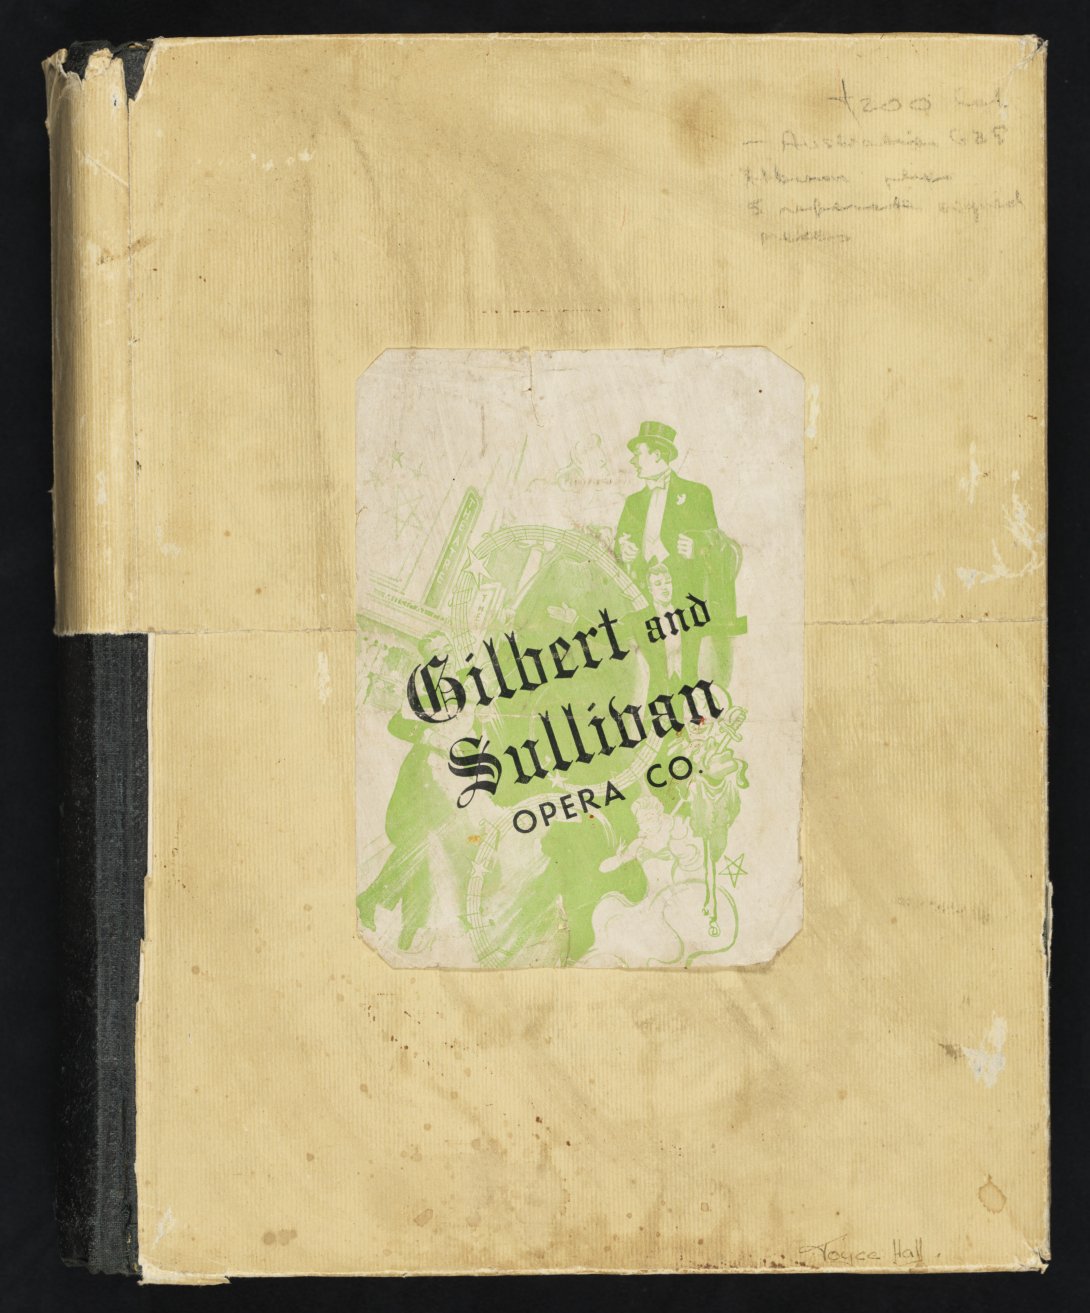 The front cover of a scrapbook reads "Gilbert and Sullivan Opera Co" printed over a green logo